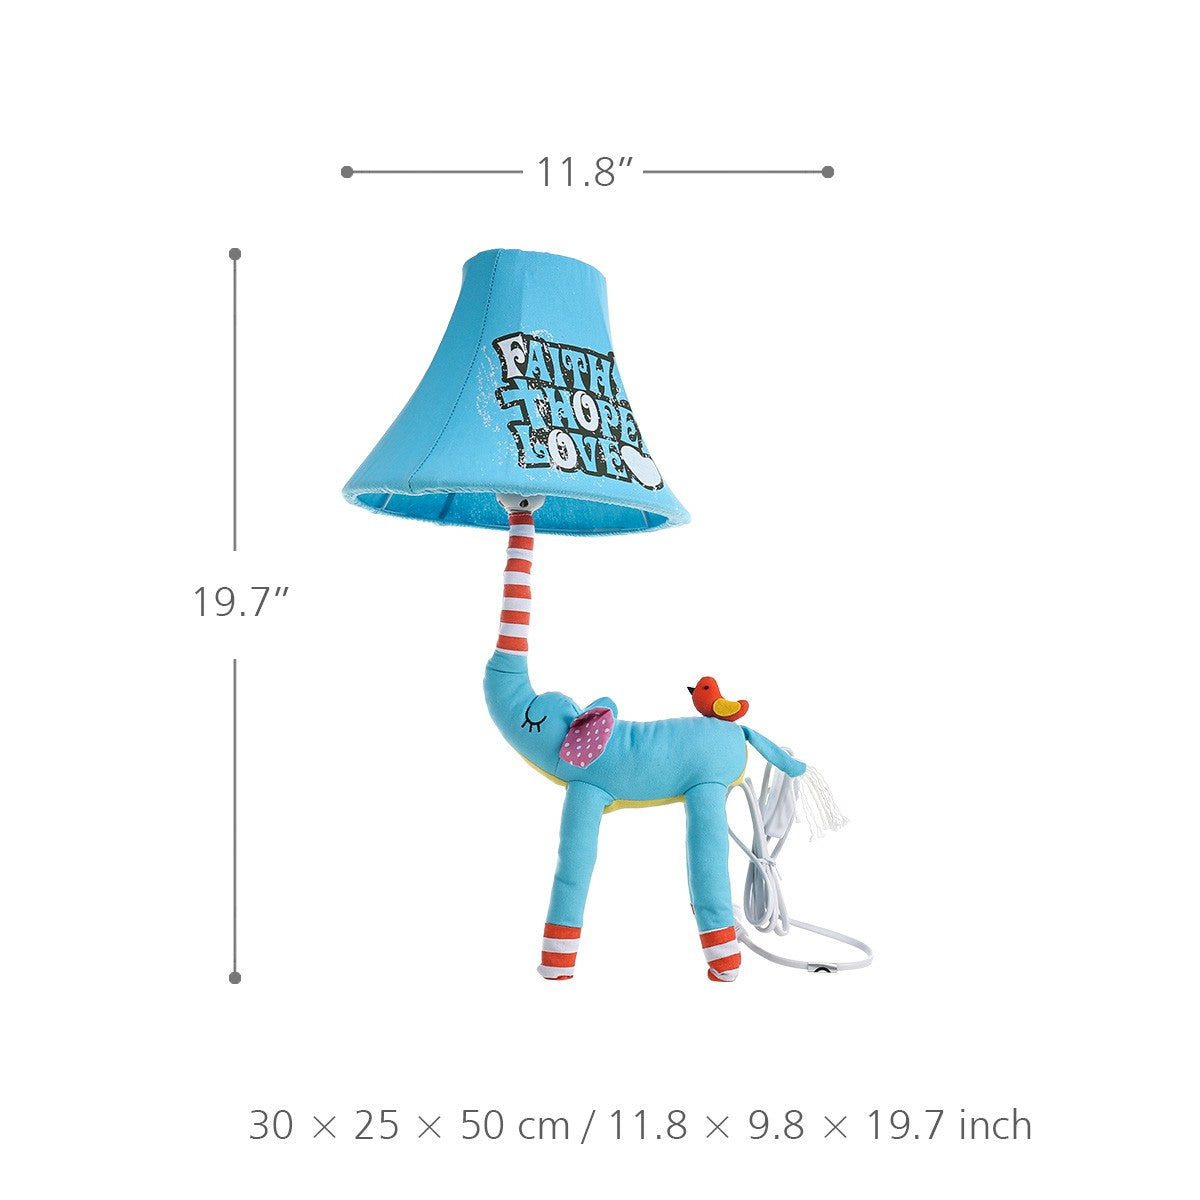 Elephant Toys and Elephant Table Lamp with Blue and Textile Fabric Feature